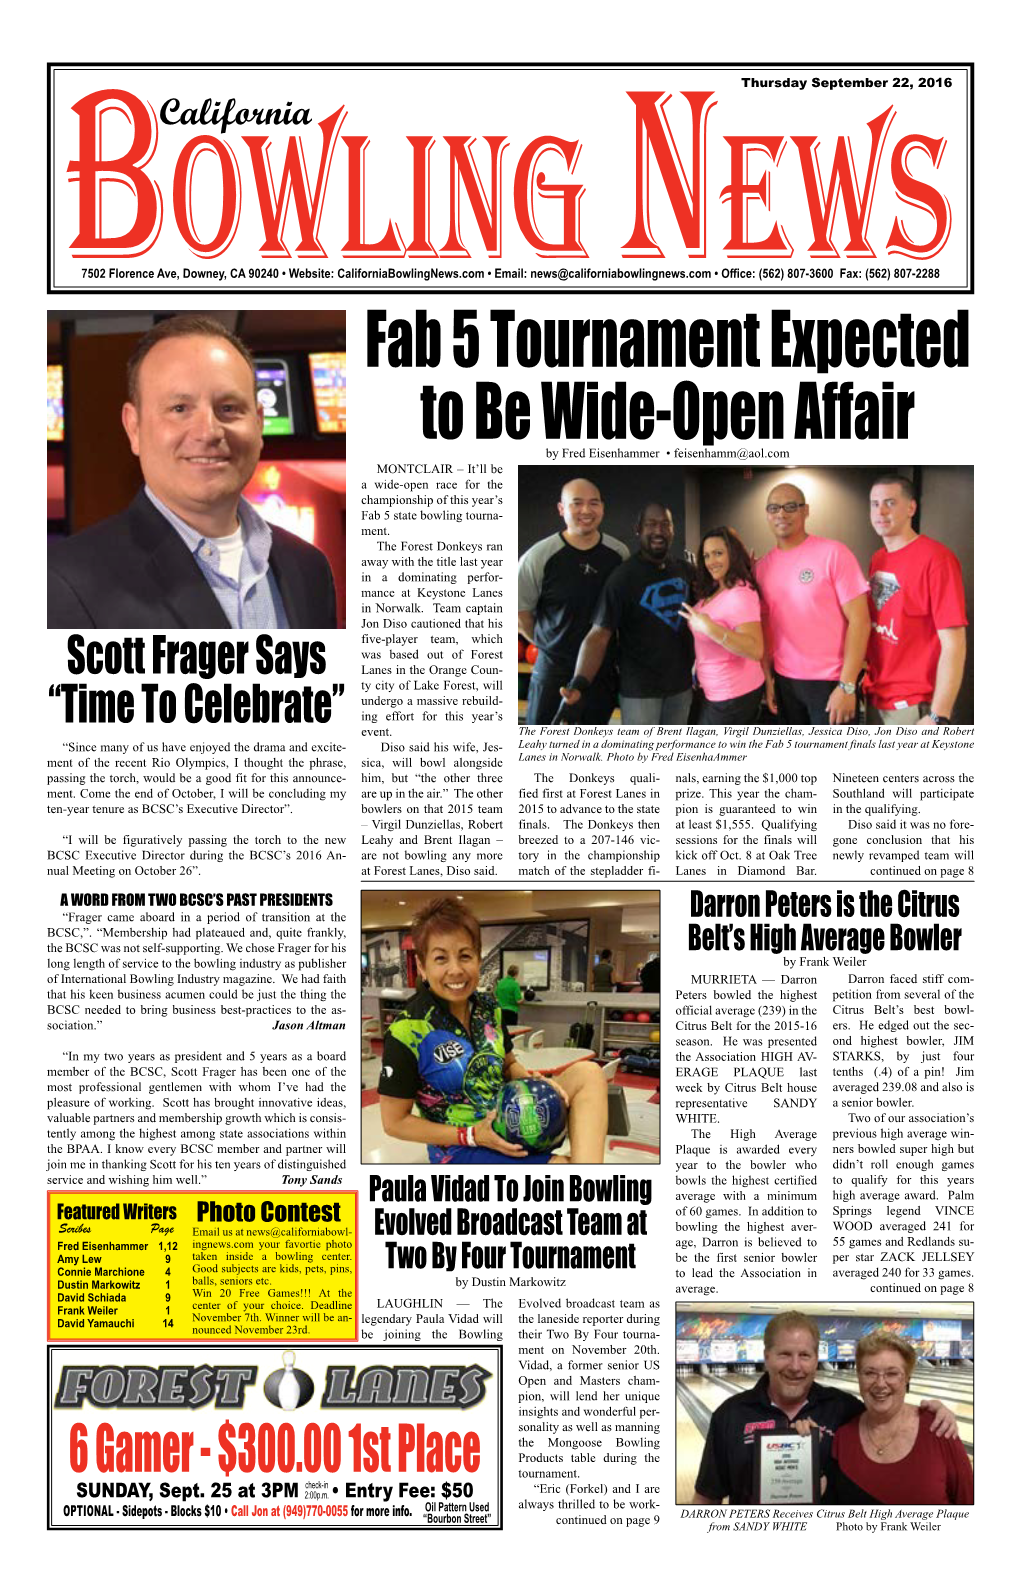 Fab 5 Tournament Expected to Be Wide-Open Affair